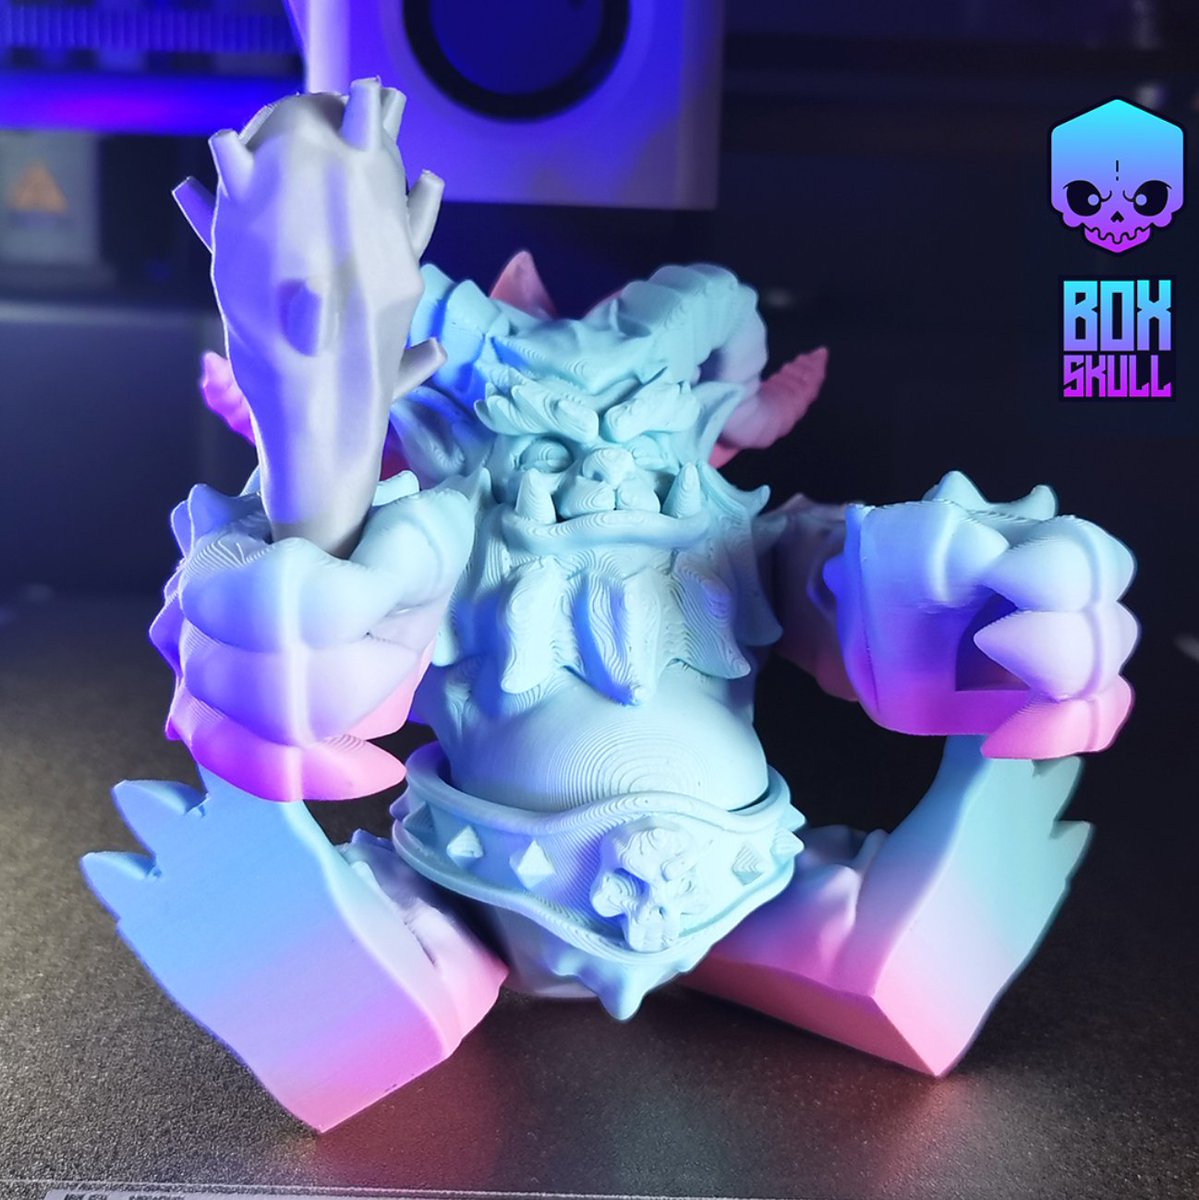 ARTICULATED FIGURE - YETI 
New desing available now on @Cults3D 

cults3d.com/en/3d-model/ar…

#boxskull  #cults #yeti #printst #print3d #bambulab  #cults3d #Abominable #SnowMan